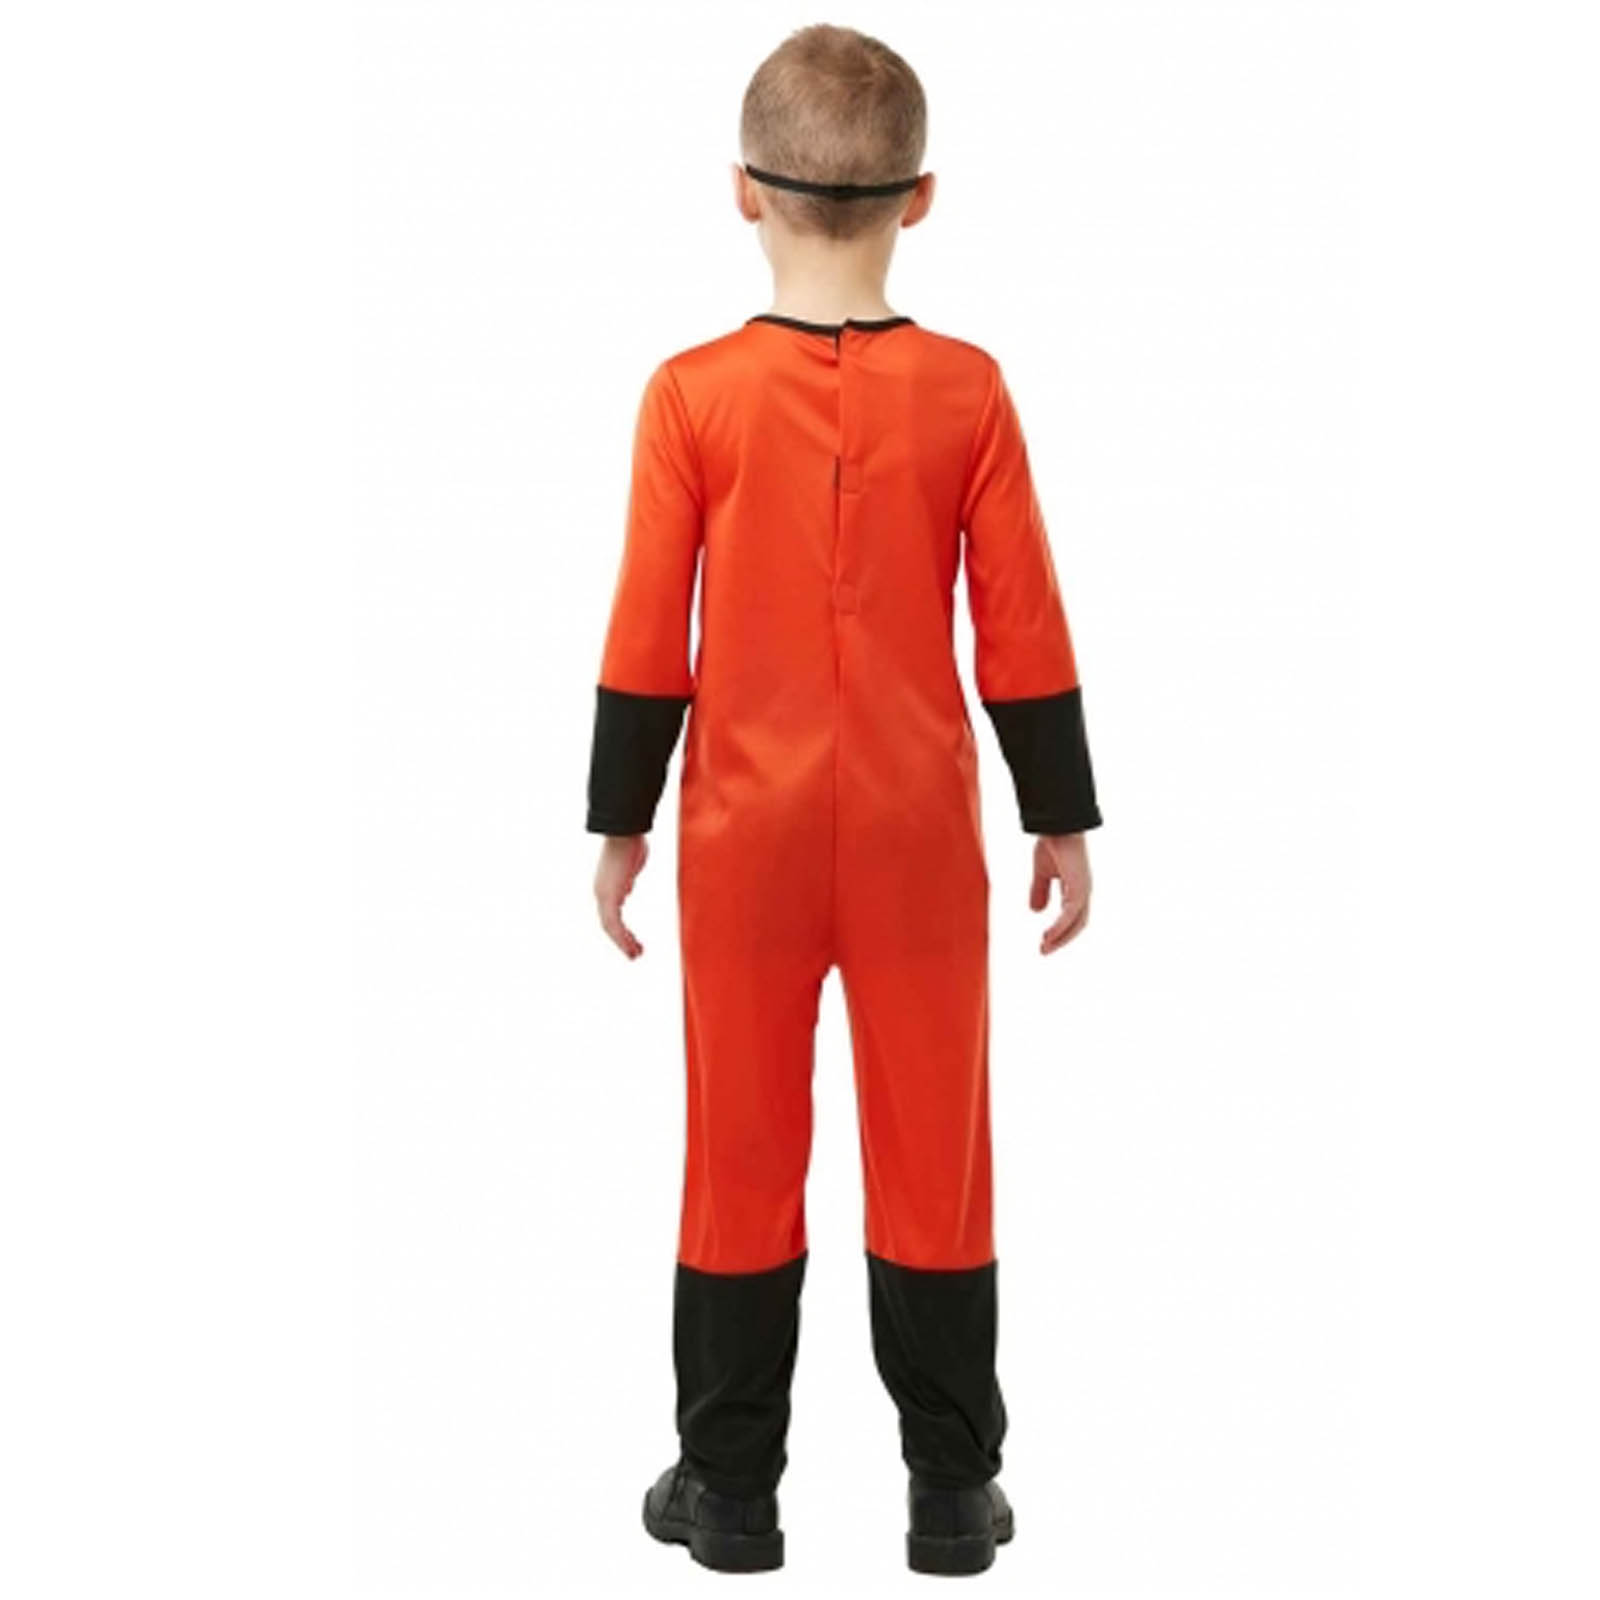 Incredibles 2 Jumpsuit Costume - Child